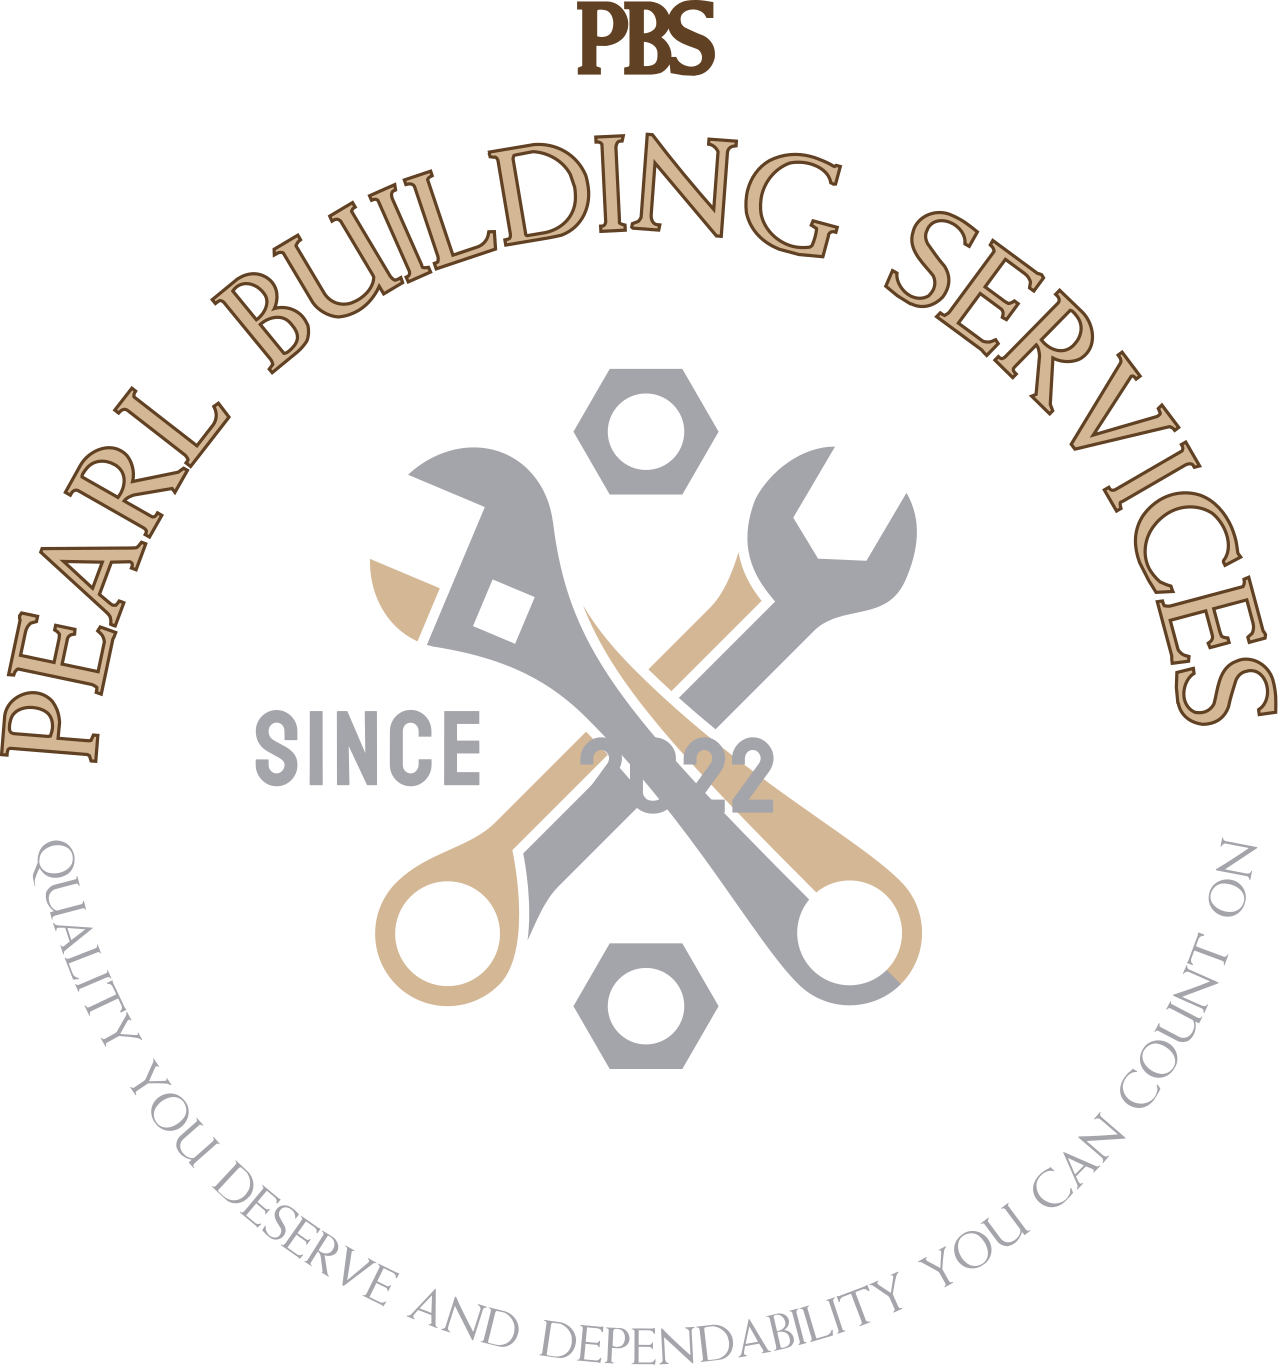 PEARL BUILDING SERVICES 's logo